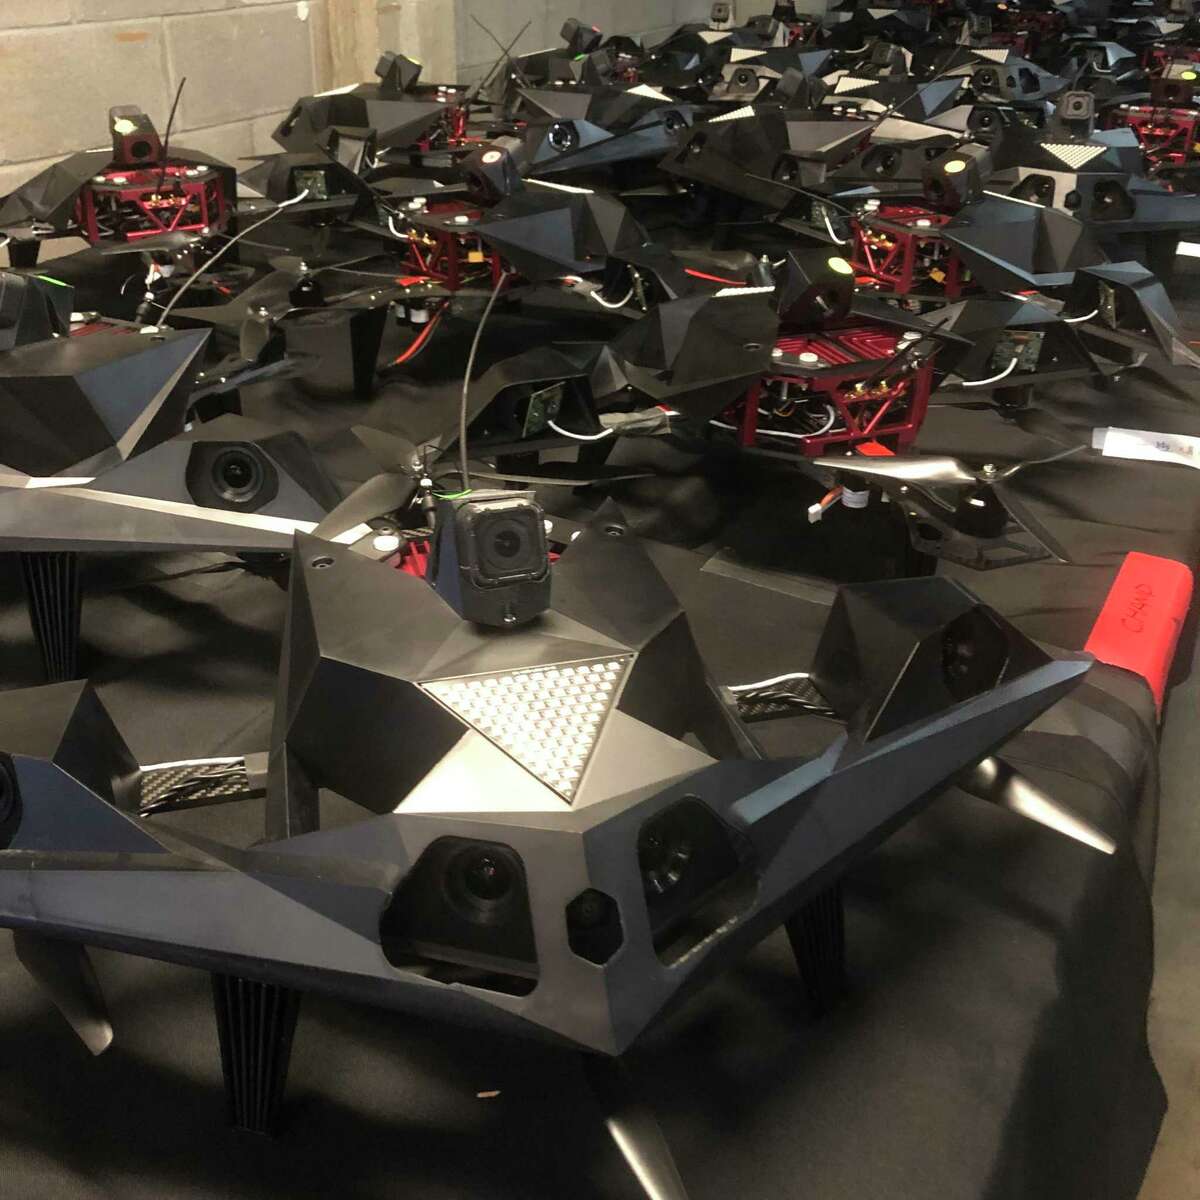 Autonomous drones prepared to race at the inaugural Artificial Intelligence Robotic Racing Circuit championship, called AlphaPilot for short. Nine teams competed in Austin, Texas on Dec. 6, 2019 for $1 million prize for developing the most advanced autonomous drone.